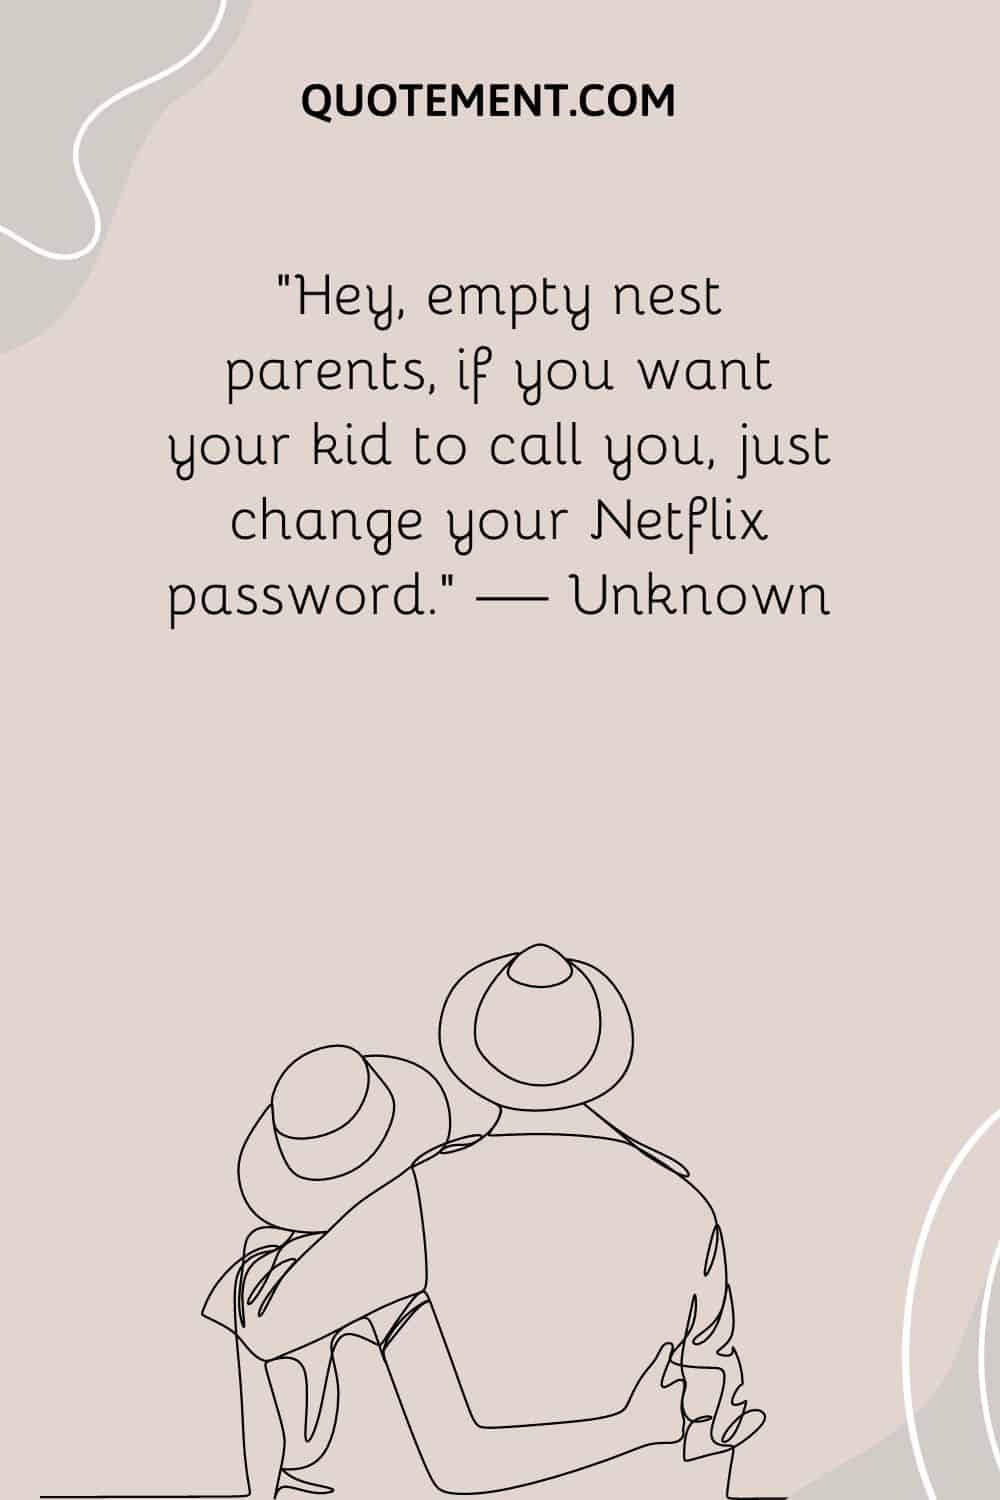 “Hey, empty nest parents, if you want your kid to call you, just change your Netflix password.” — Unknown